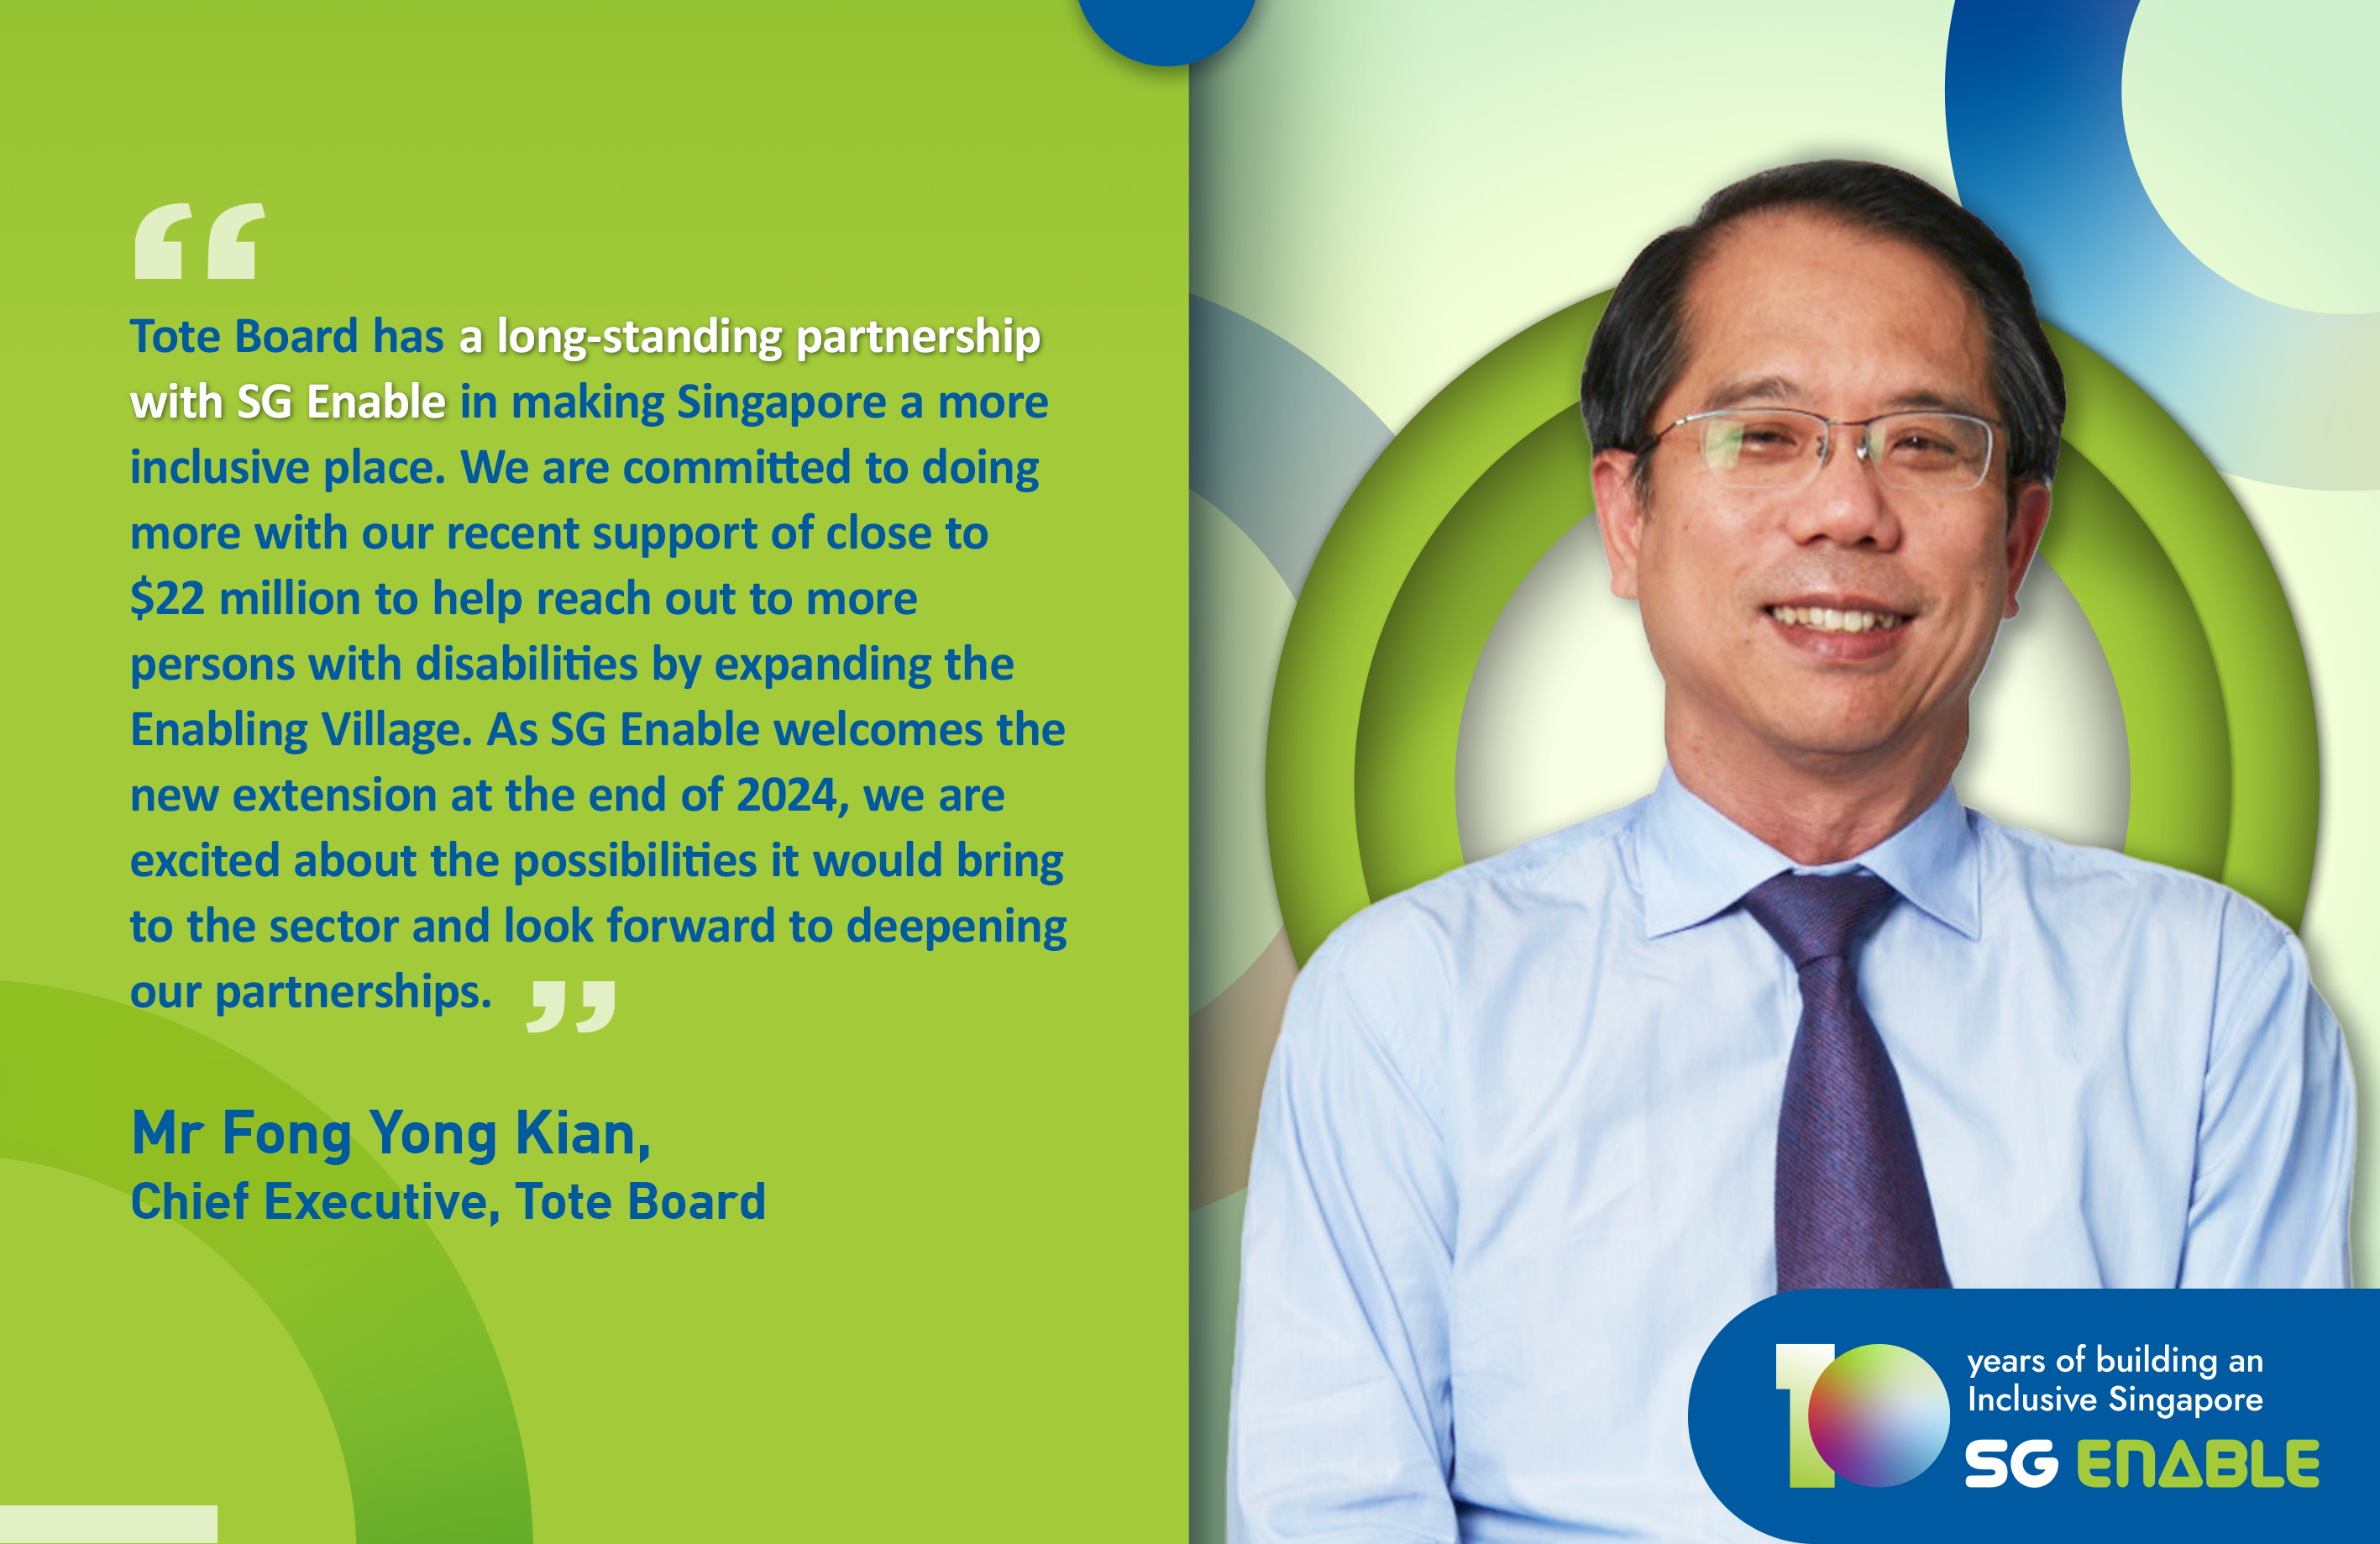 Image of Mr Yong Kian Fong, CE, Tote Board, with a quote about their long-standing partnership with SG Enable.